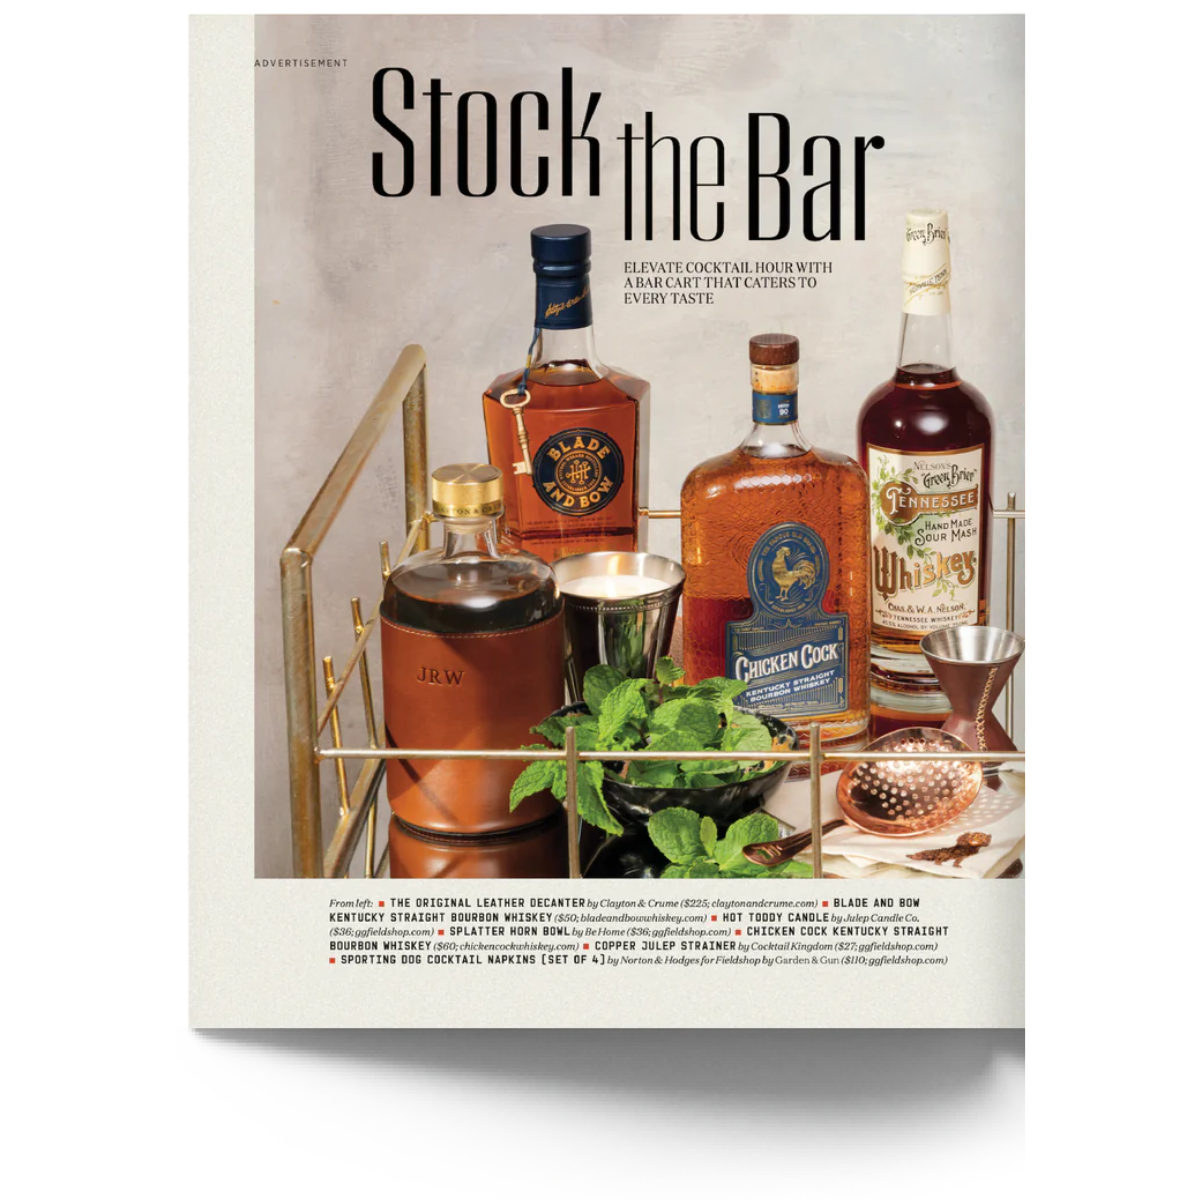 A magazine page clipping featuring a stocked bar cart with a variety of spirits and bar accessories.